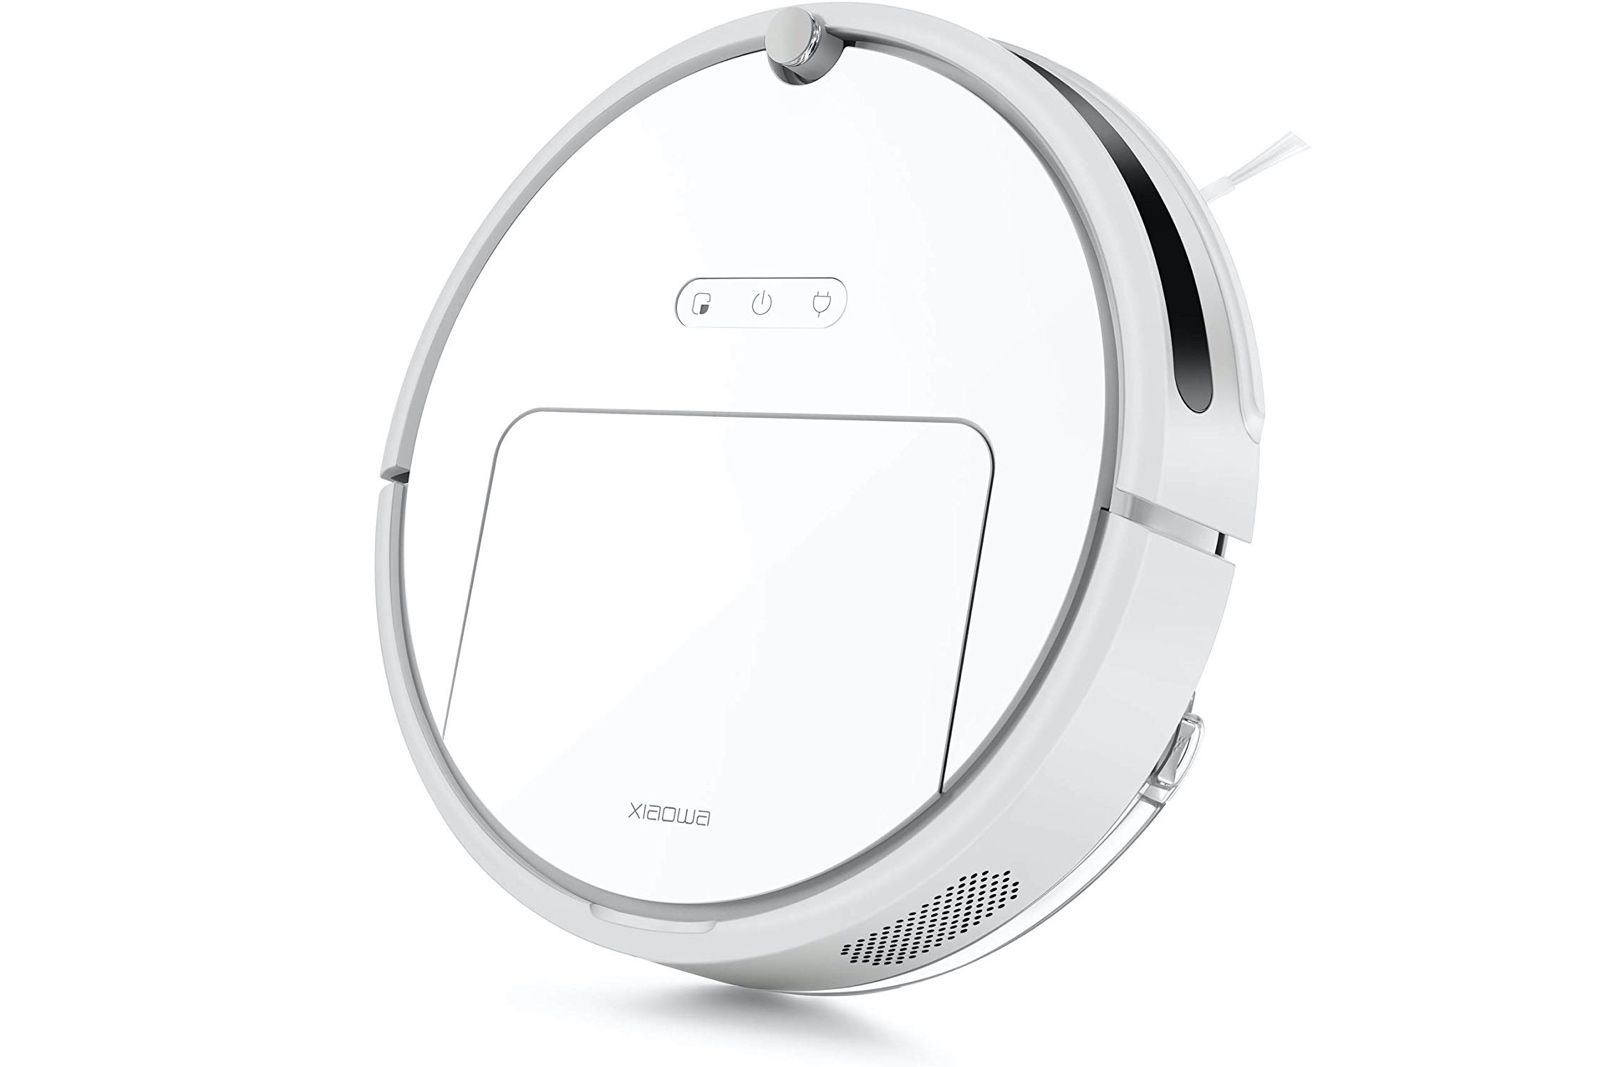 Roborocks E20 Robot Vacuum is an absolute steal for Black Friday with 100 off image 1